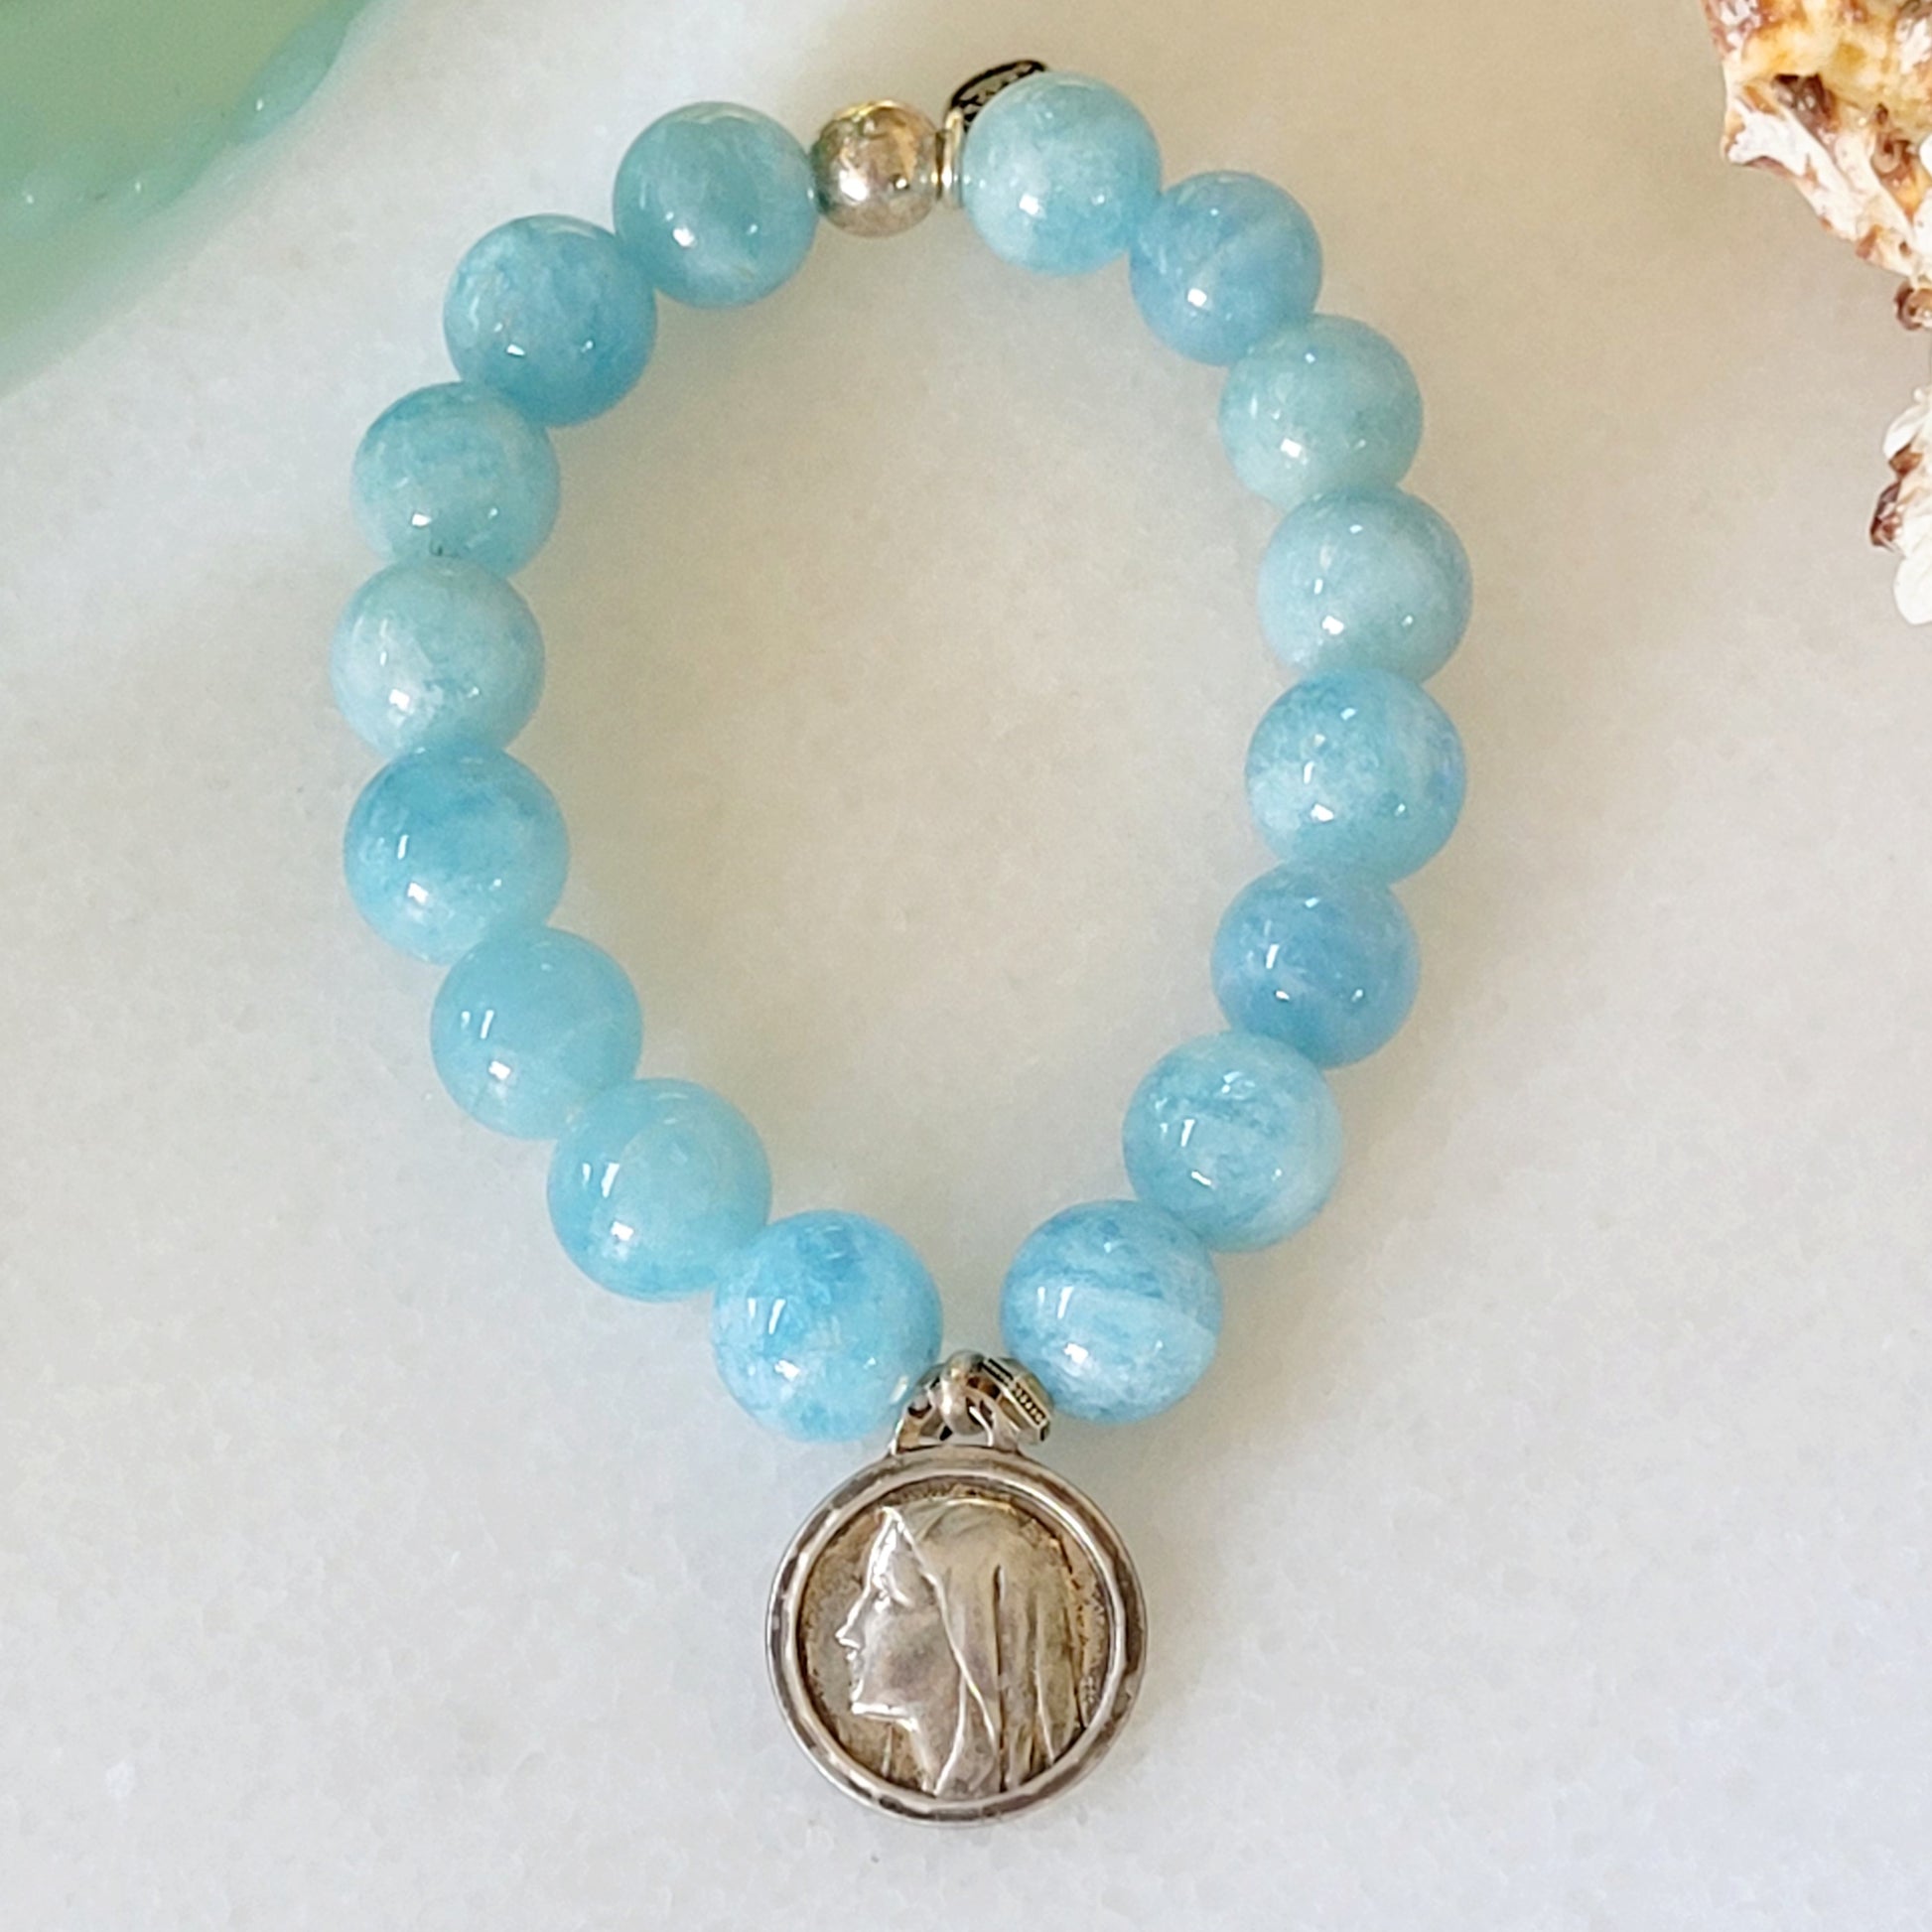 Aquamarine 12mm Beaded Bracelet w/ Our Lady of Lourdes Sterling Silver Medal